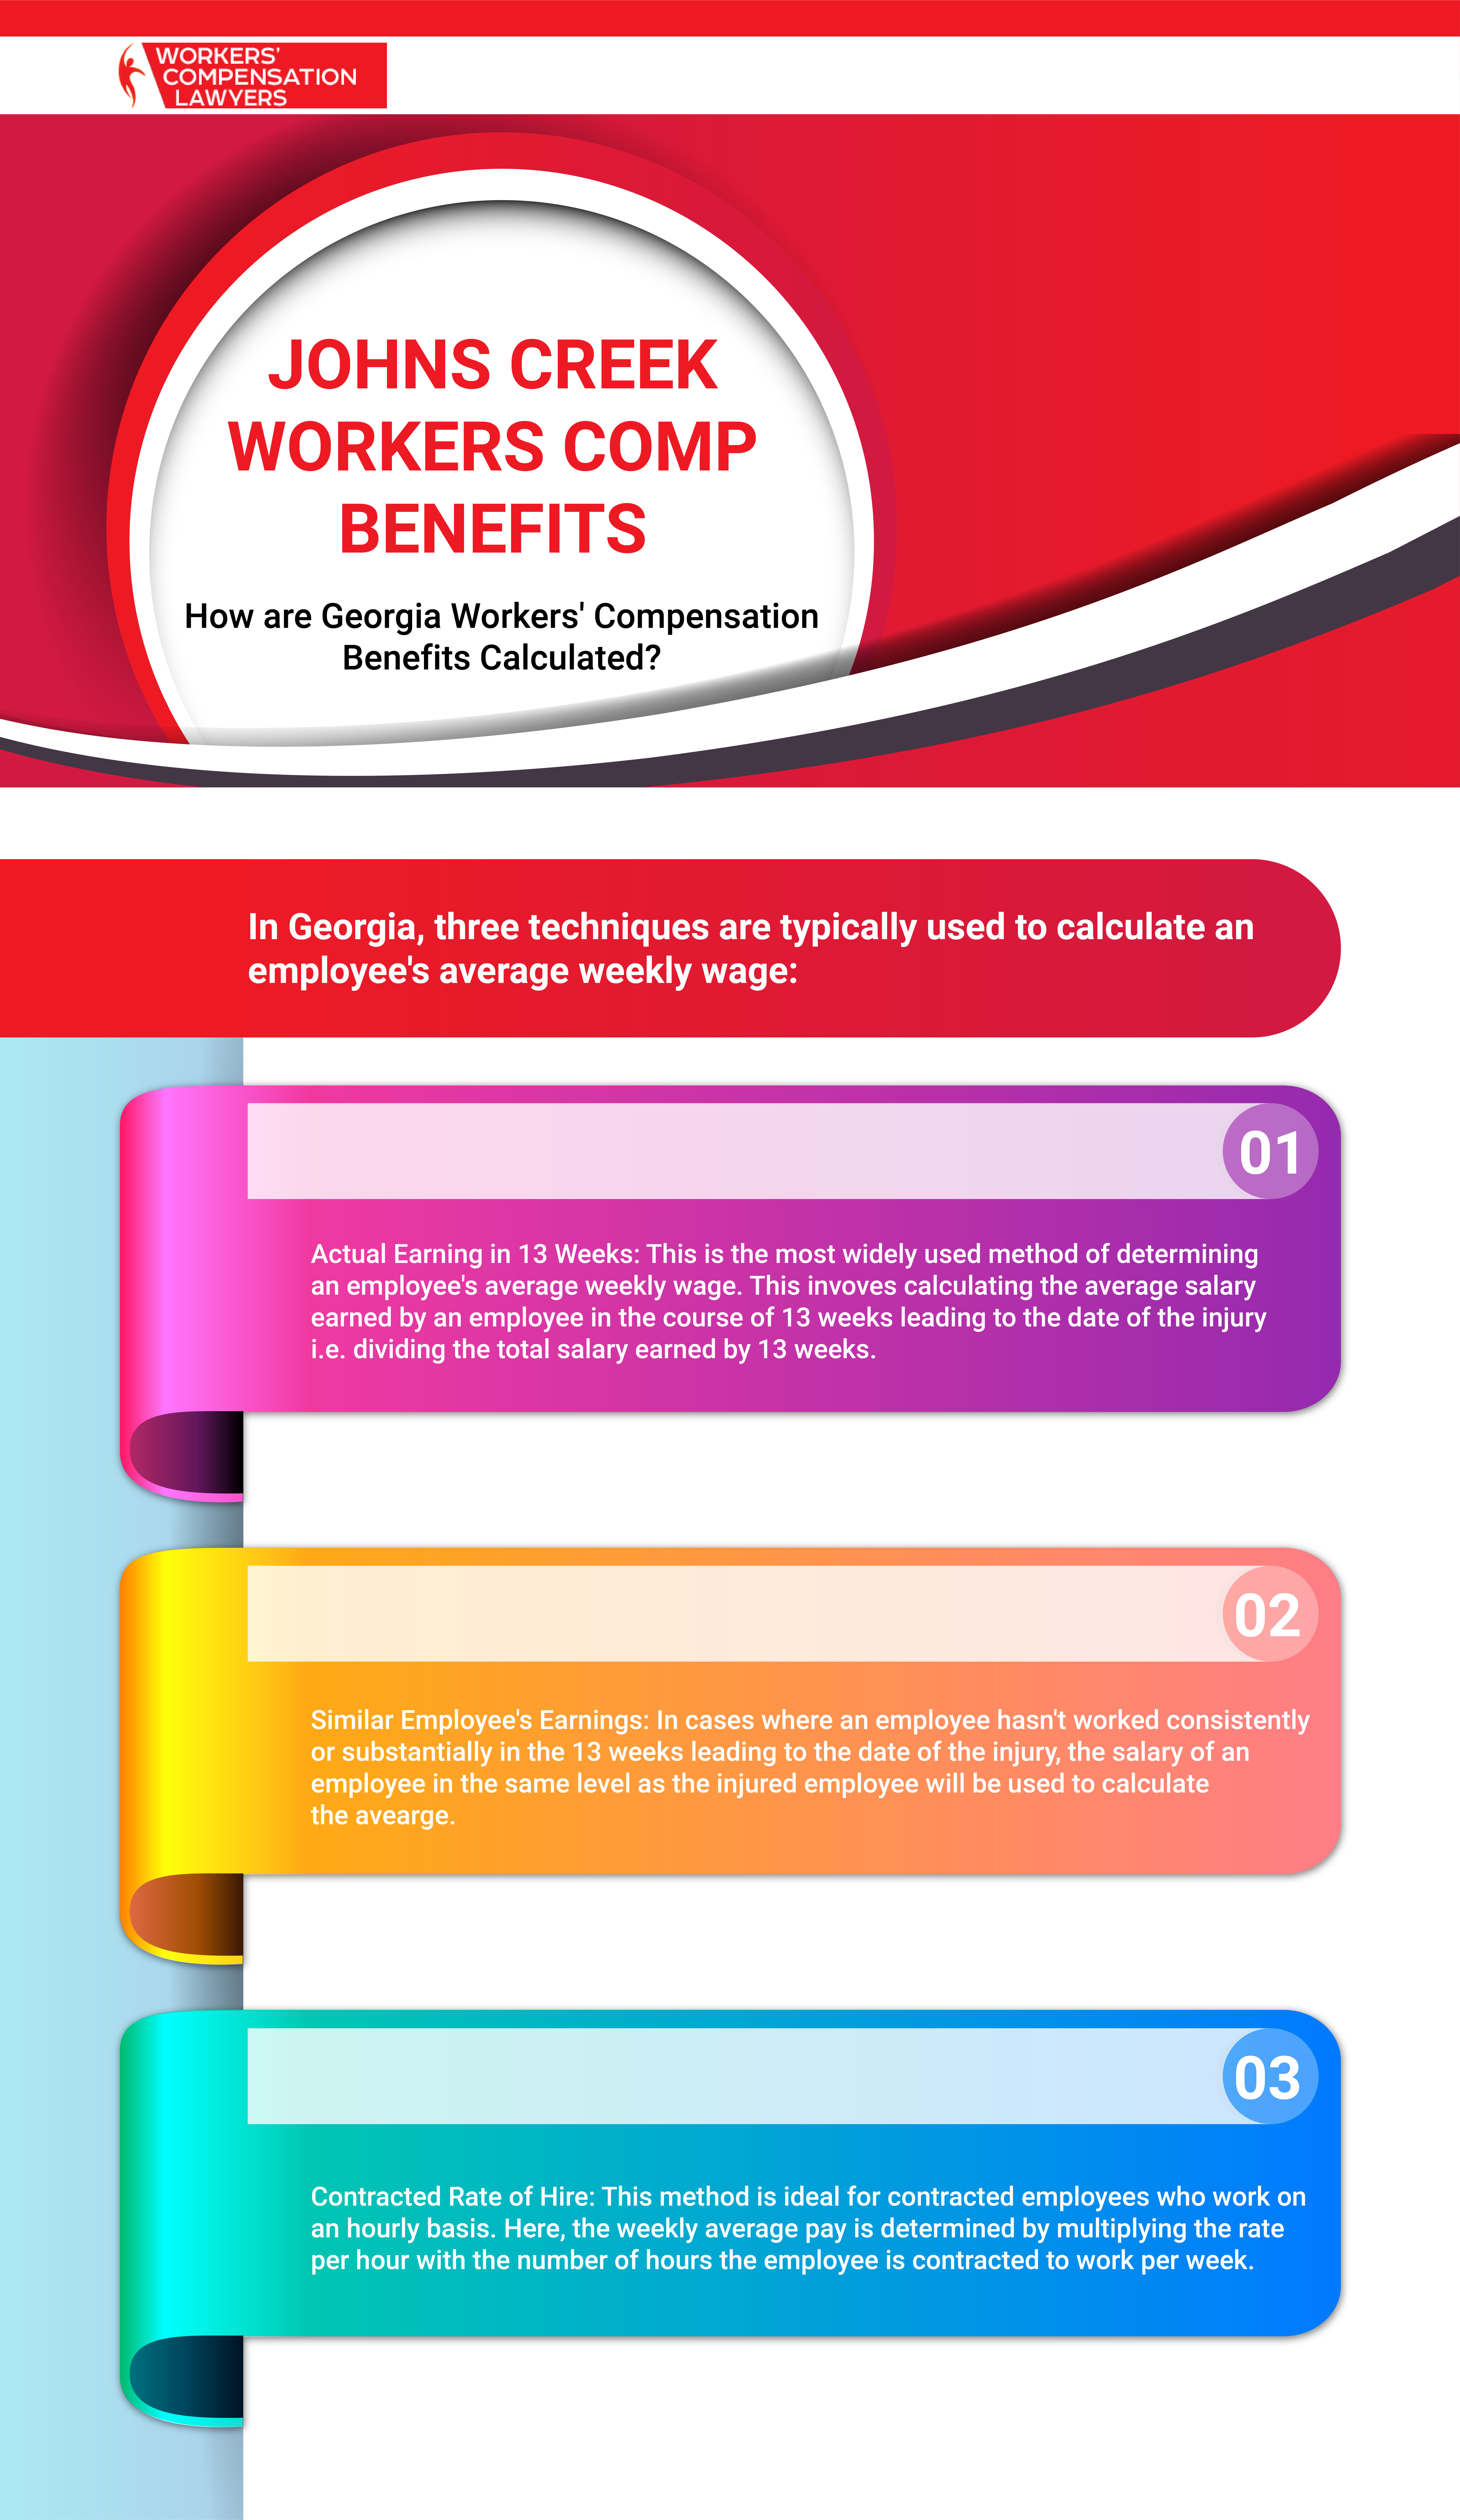 Johns Creek Workers Compensation Benefits Infographic